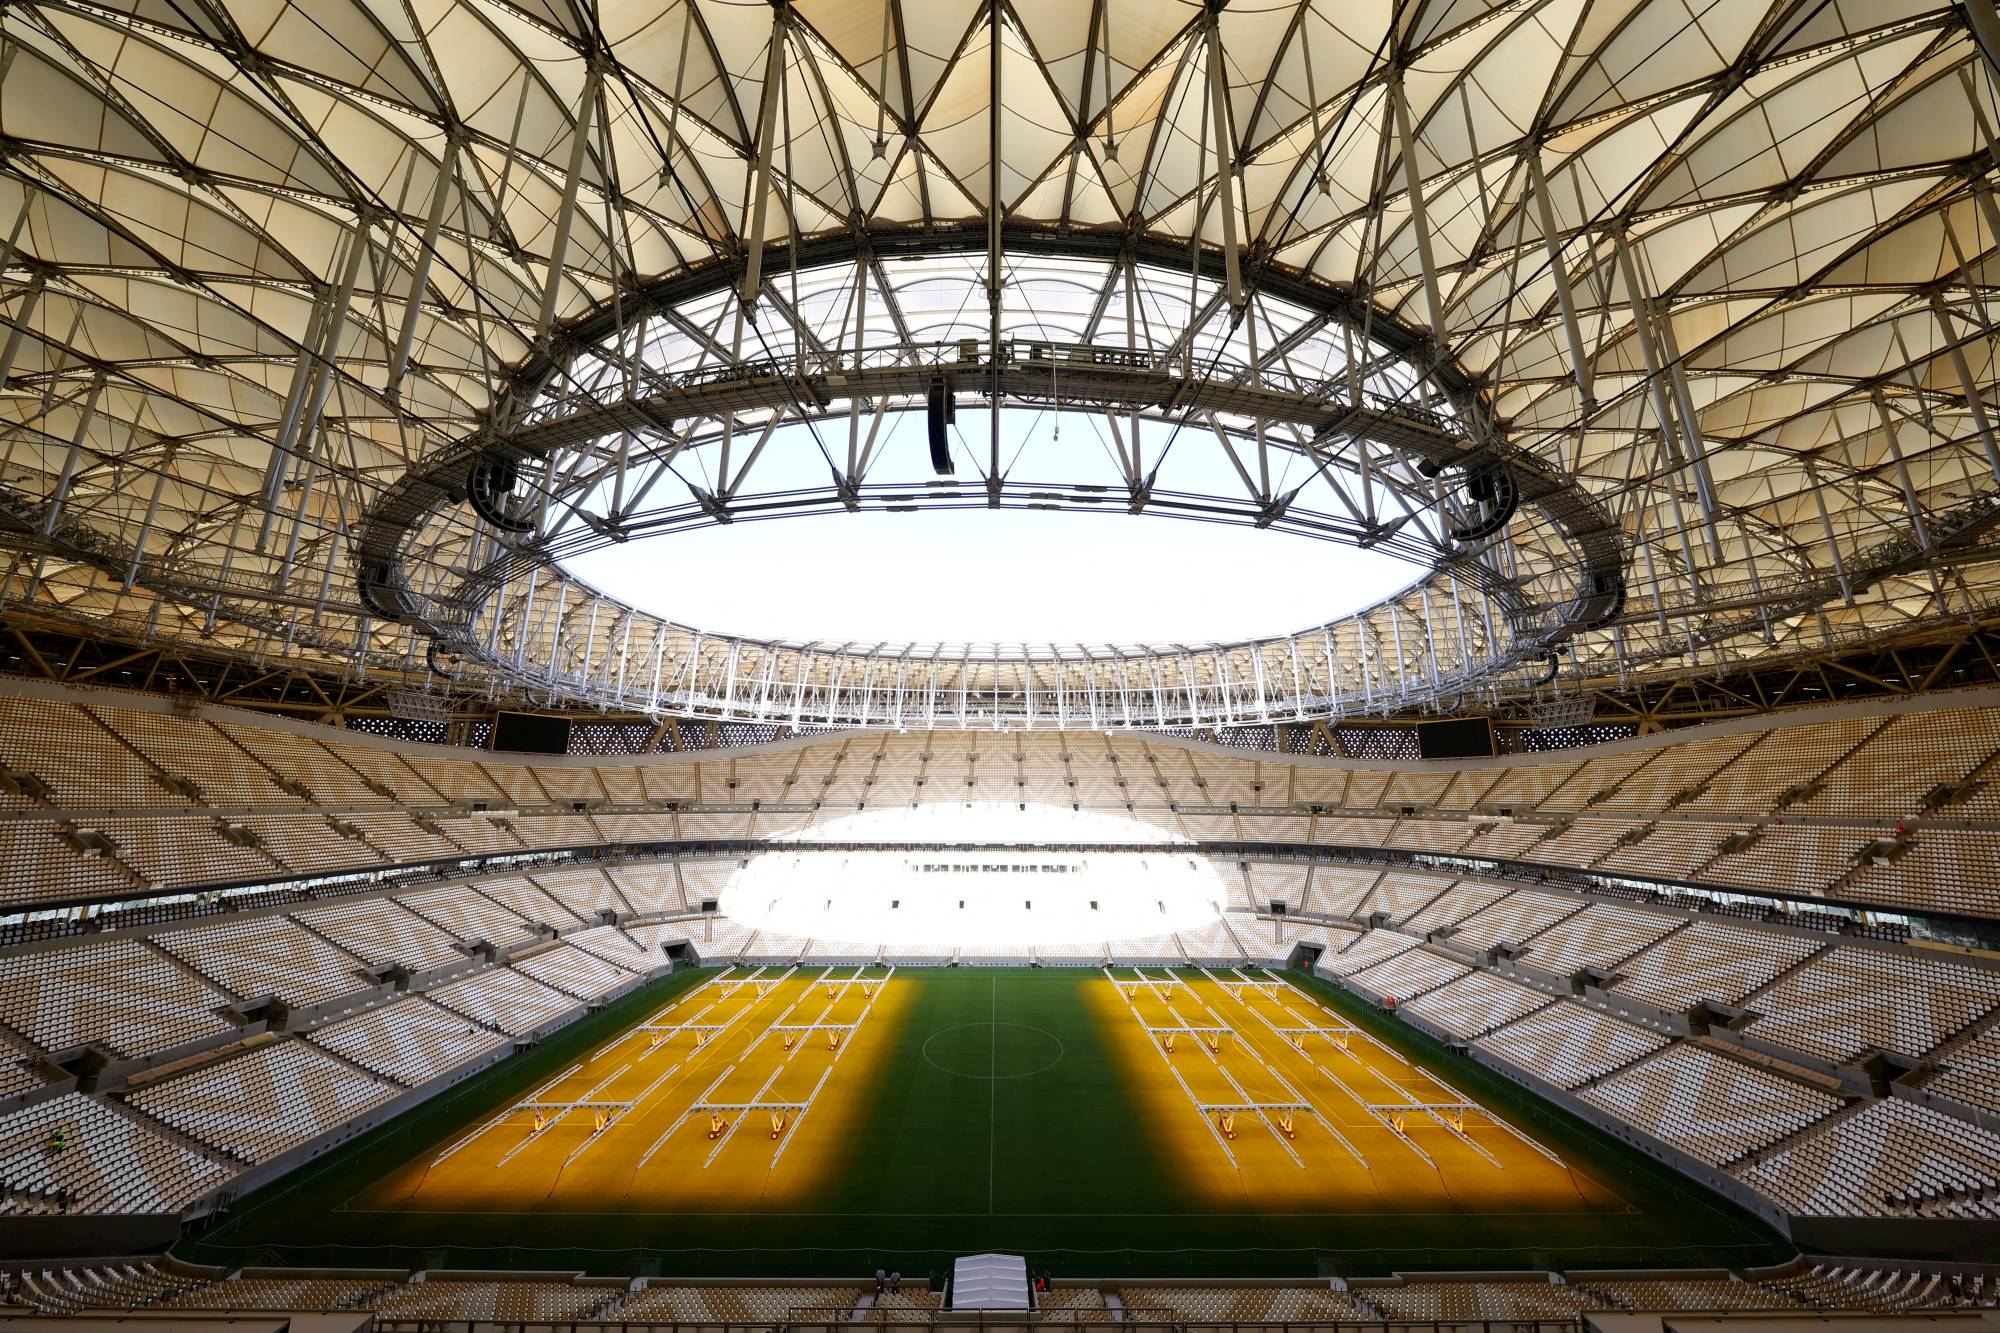 Louis Vuitton and the FIFA World Cup association transform the